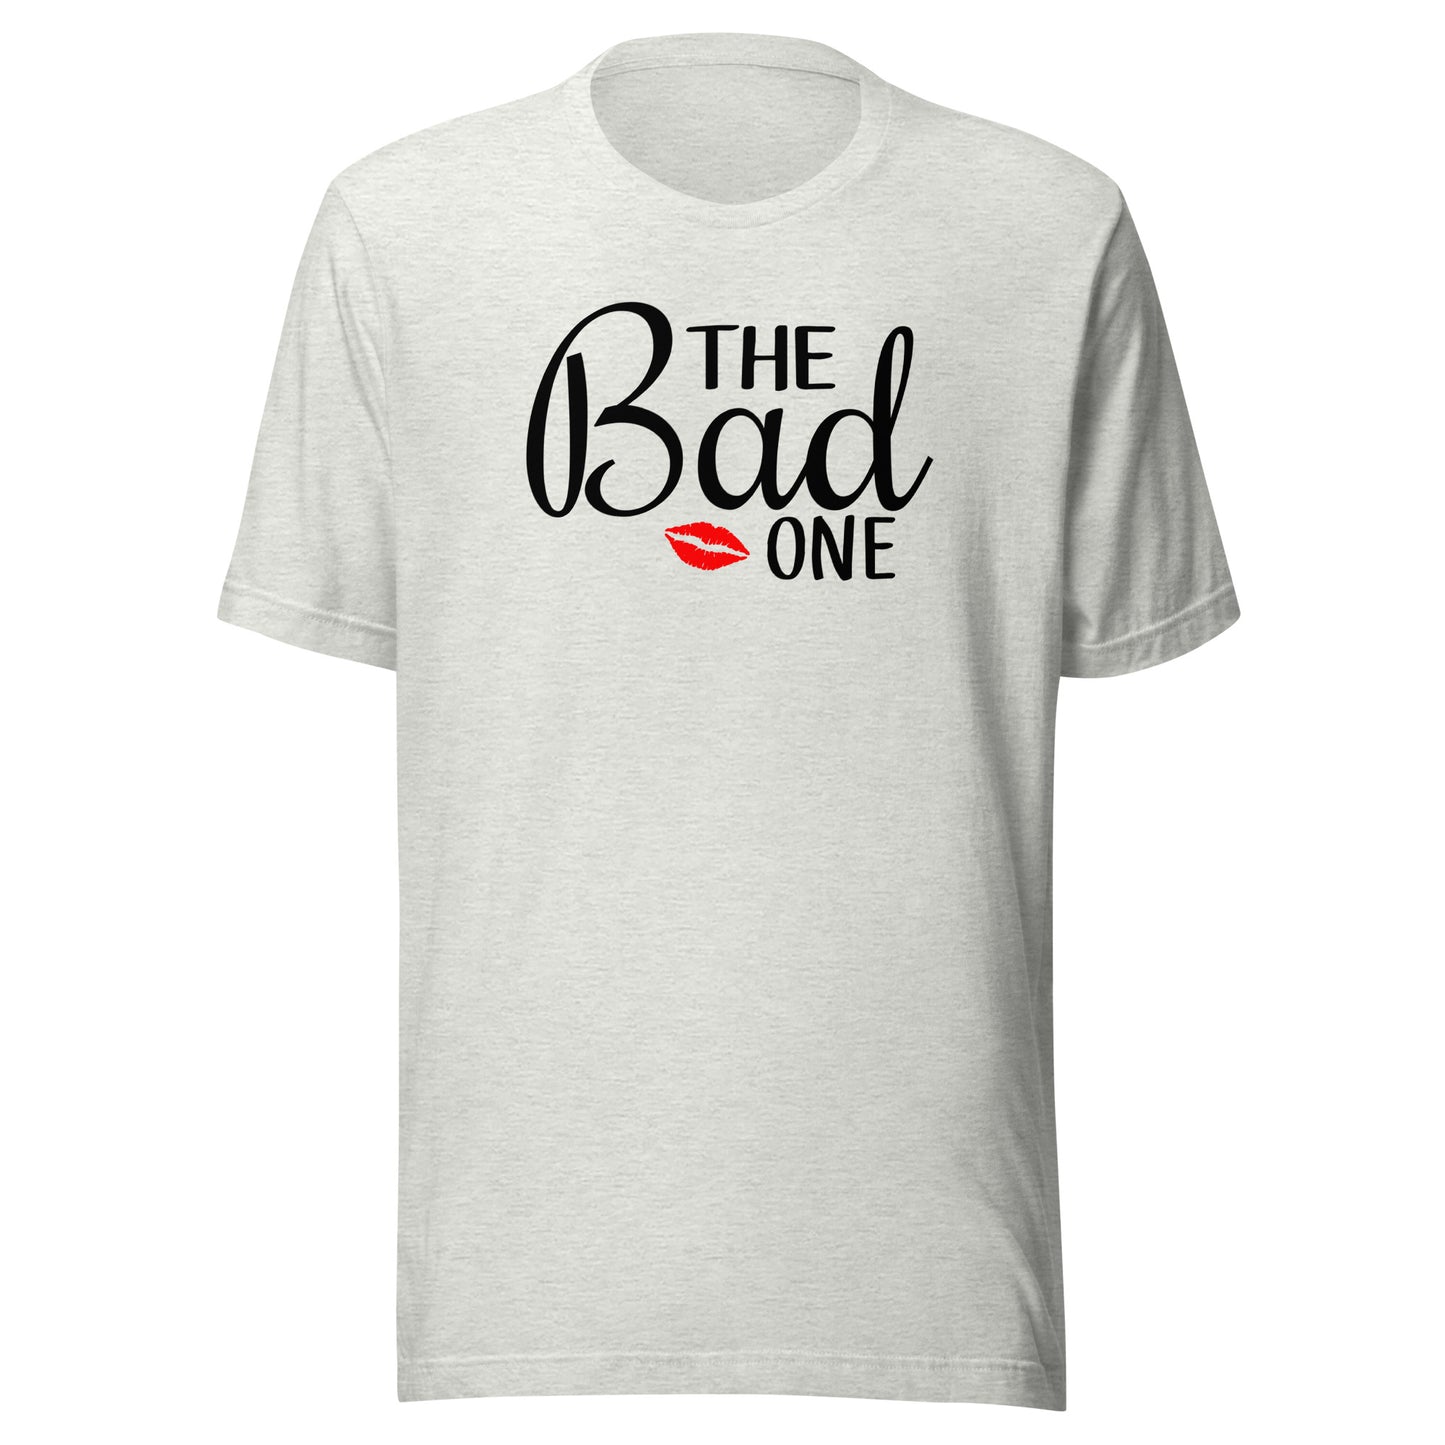 Large - XL The Bad One (black letters)